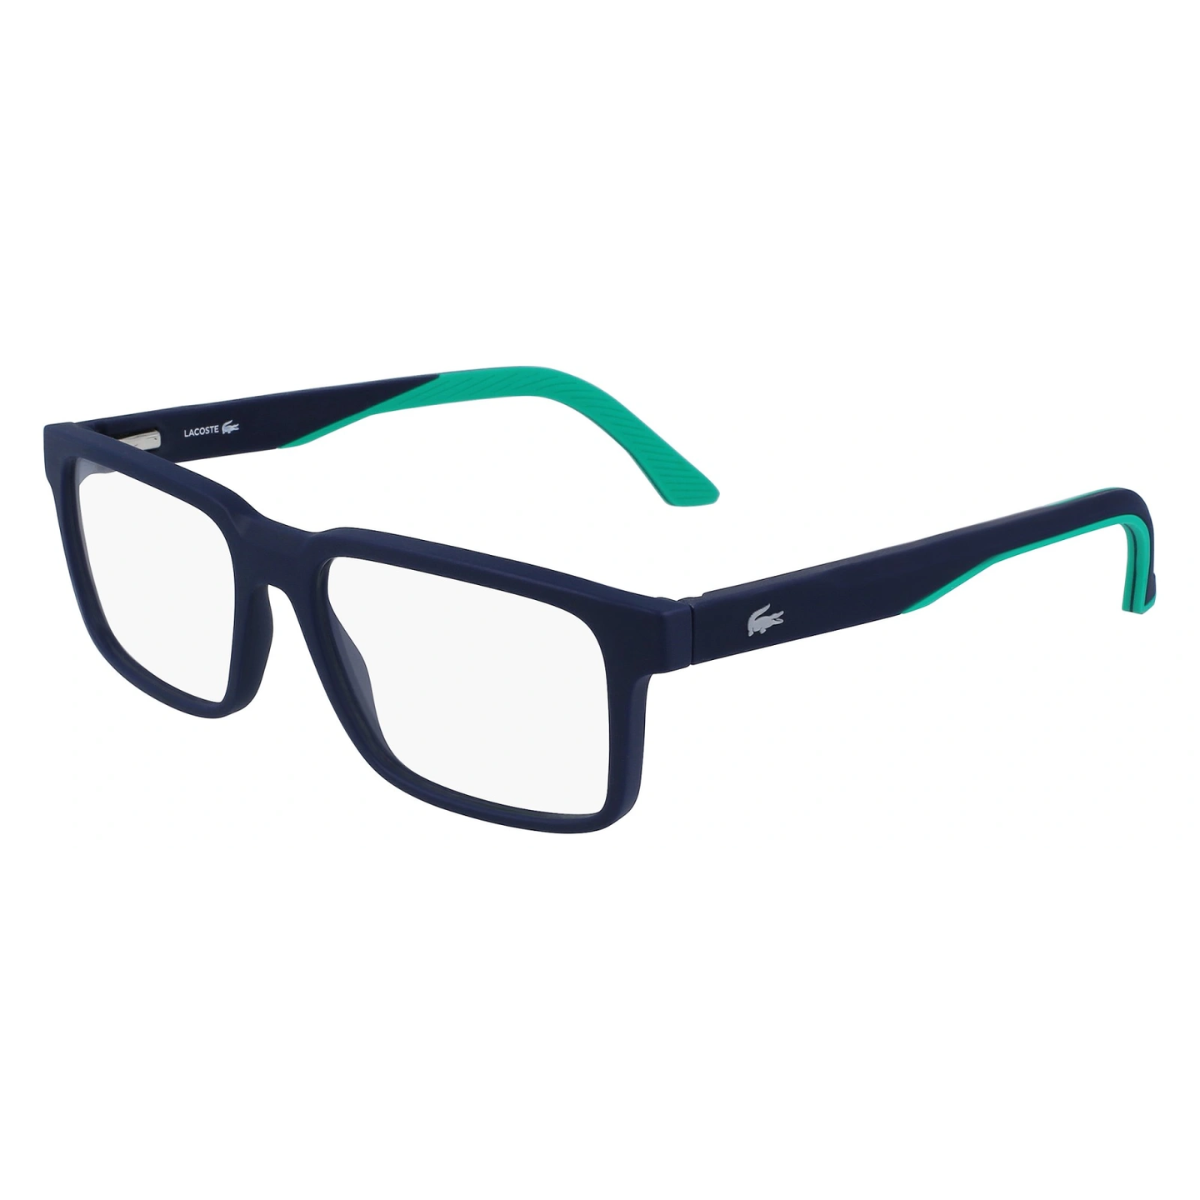 Lacoste 2922 400 Frame